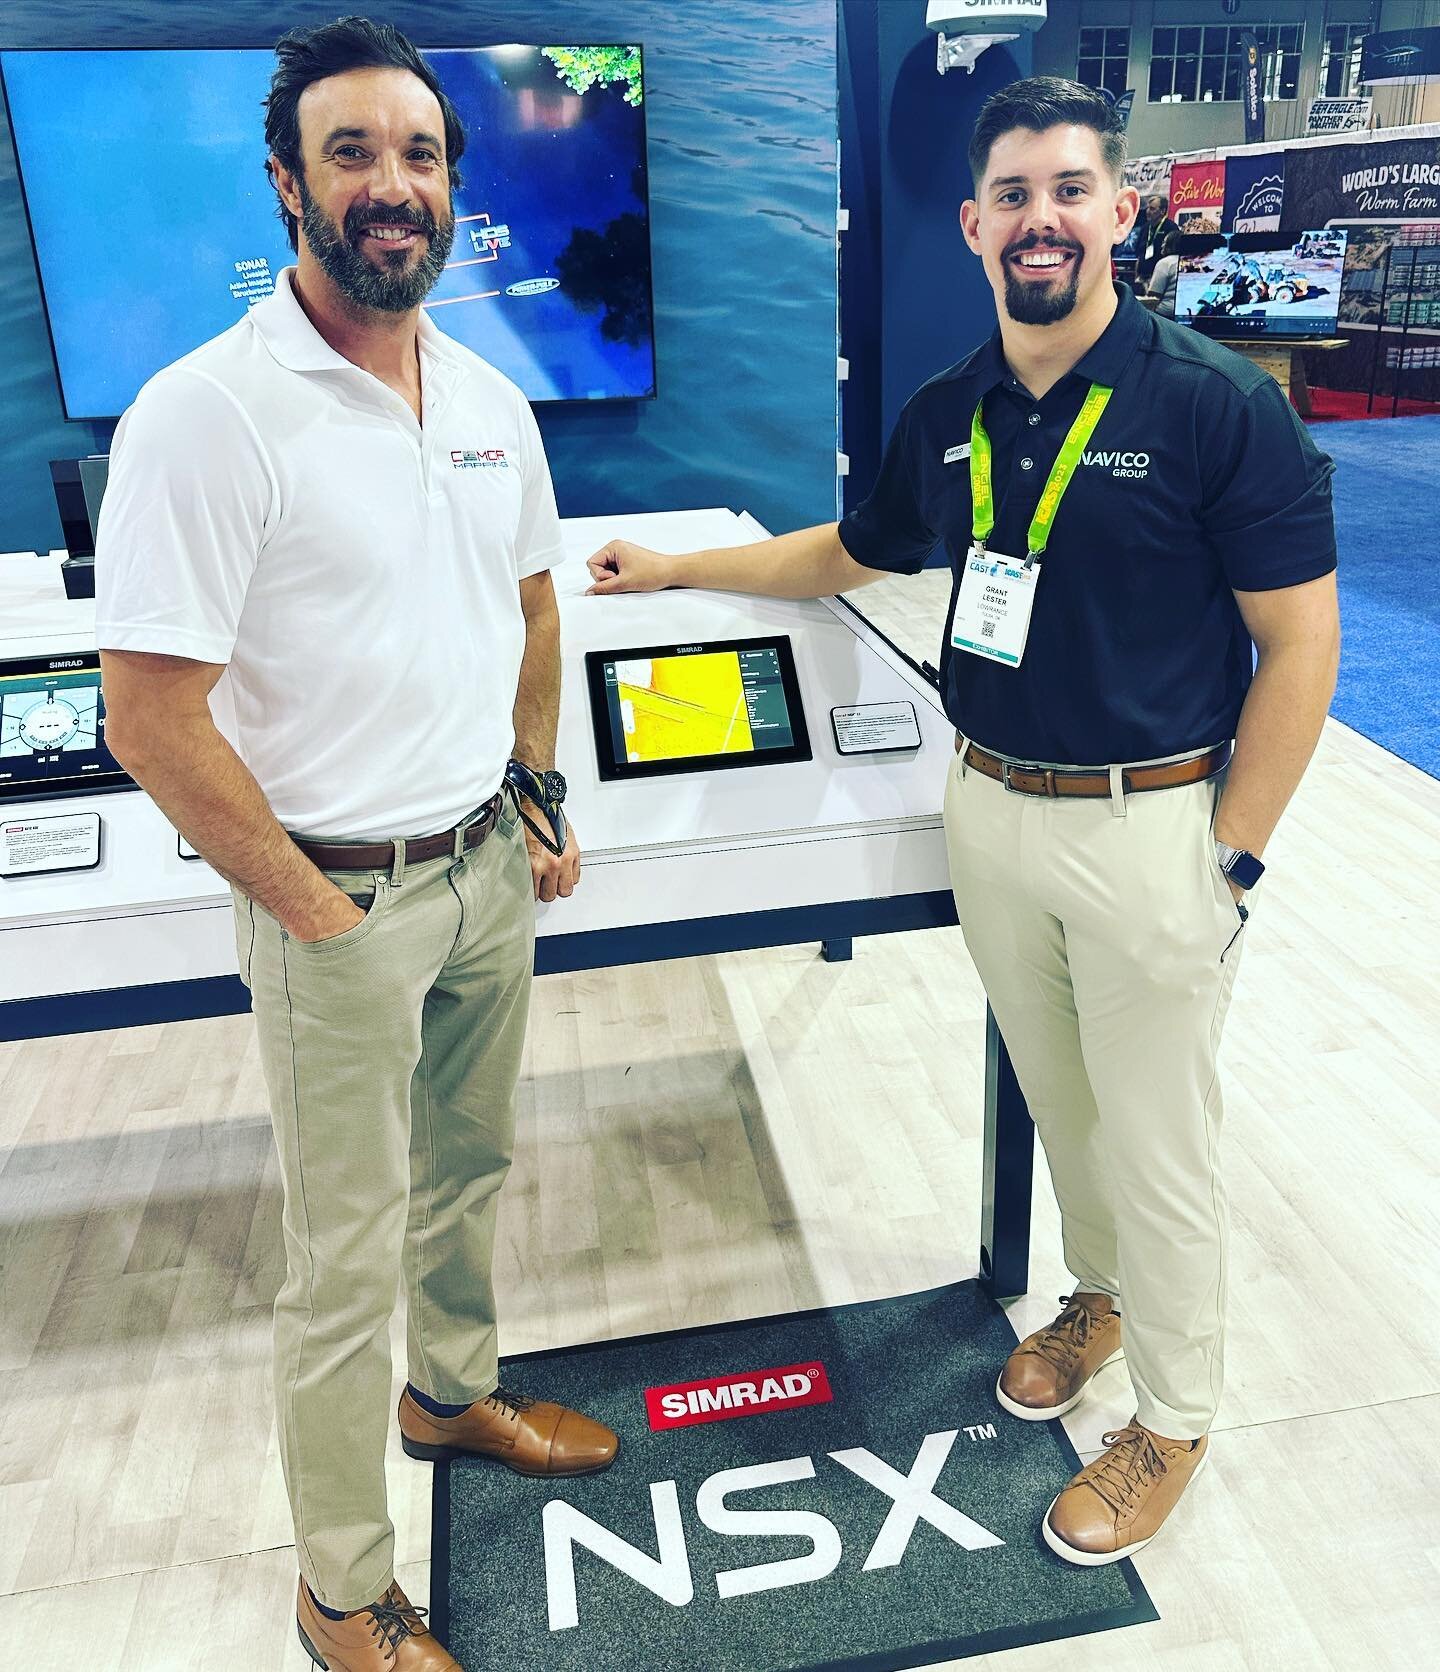 CMOR and SIMRAD have just announced compatibility on the NSX platforms with the software release 1.5.  Come see the CMOR NSX X-Charts here @icastshow @simradnsx @nsx @simradyachting